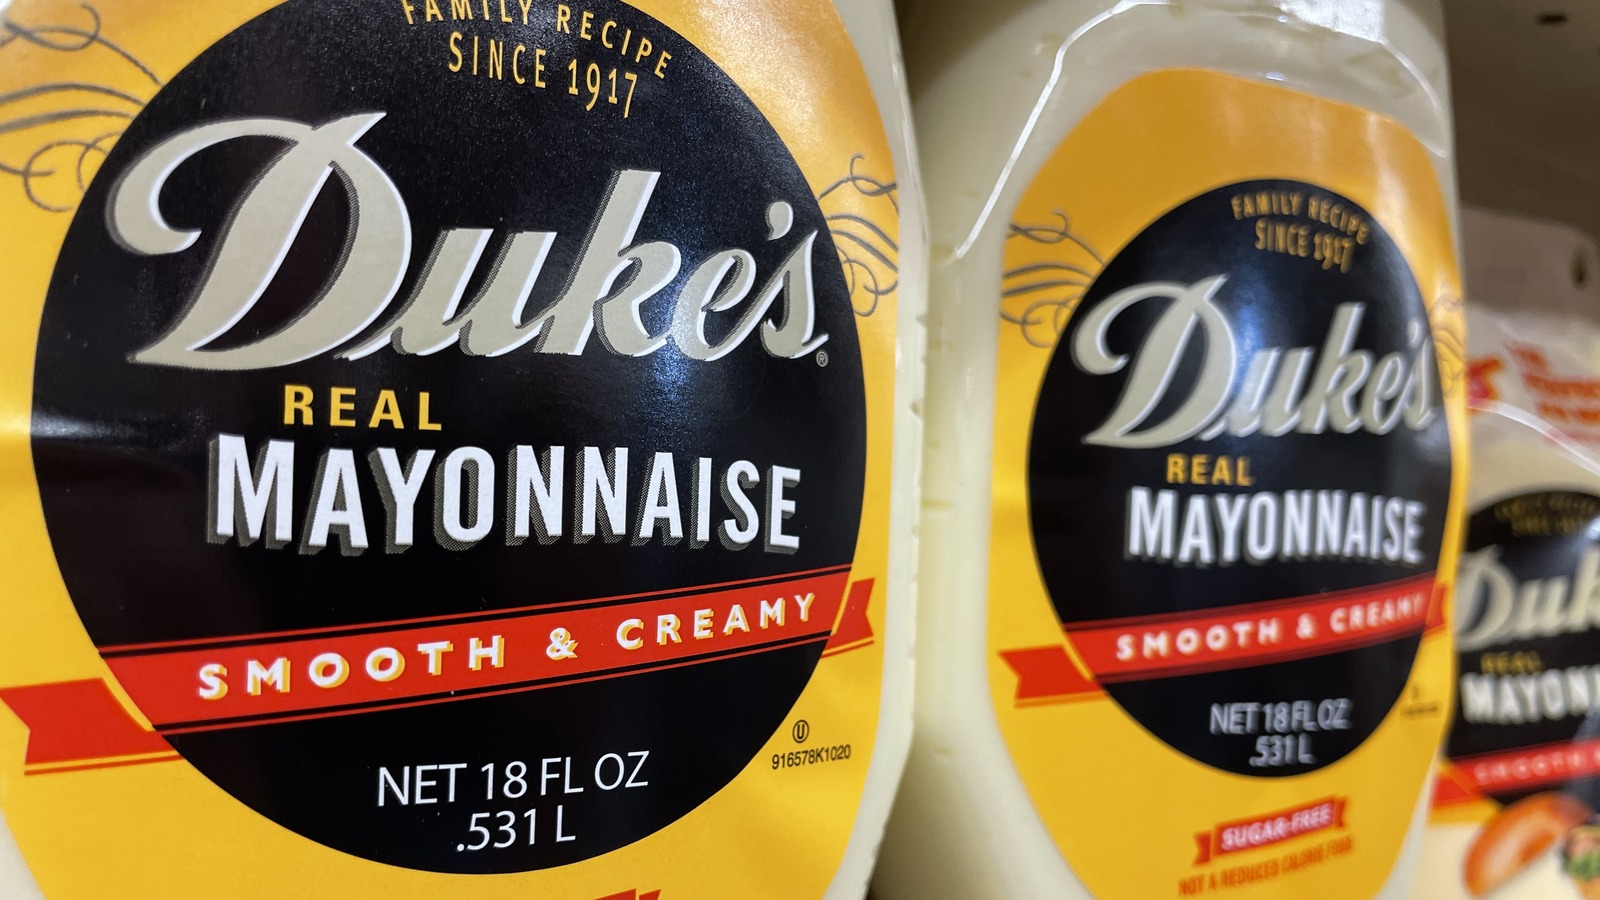 https://www.thedailymeal.com/img/gallery/12-things-you-need-to-know-about-dukes-mayo/l-intro-1683570523.jpg